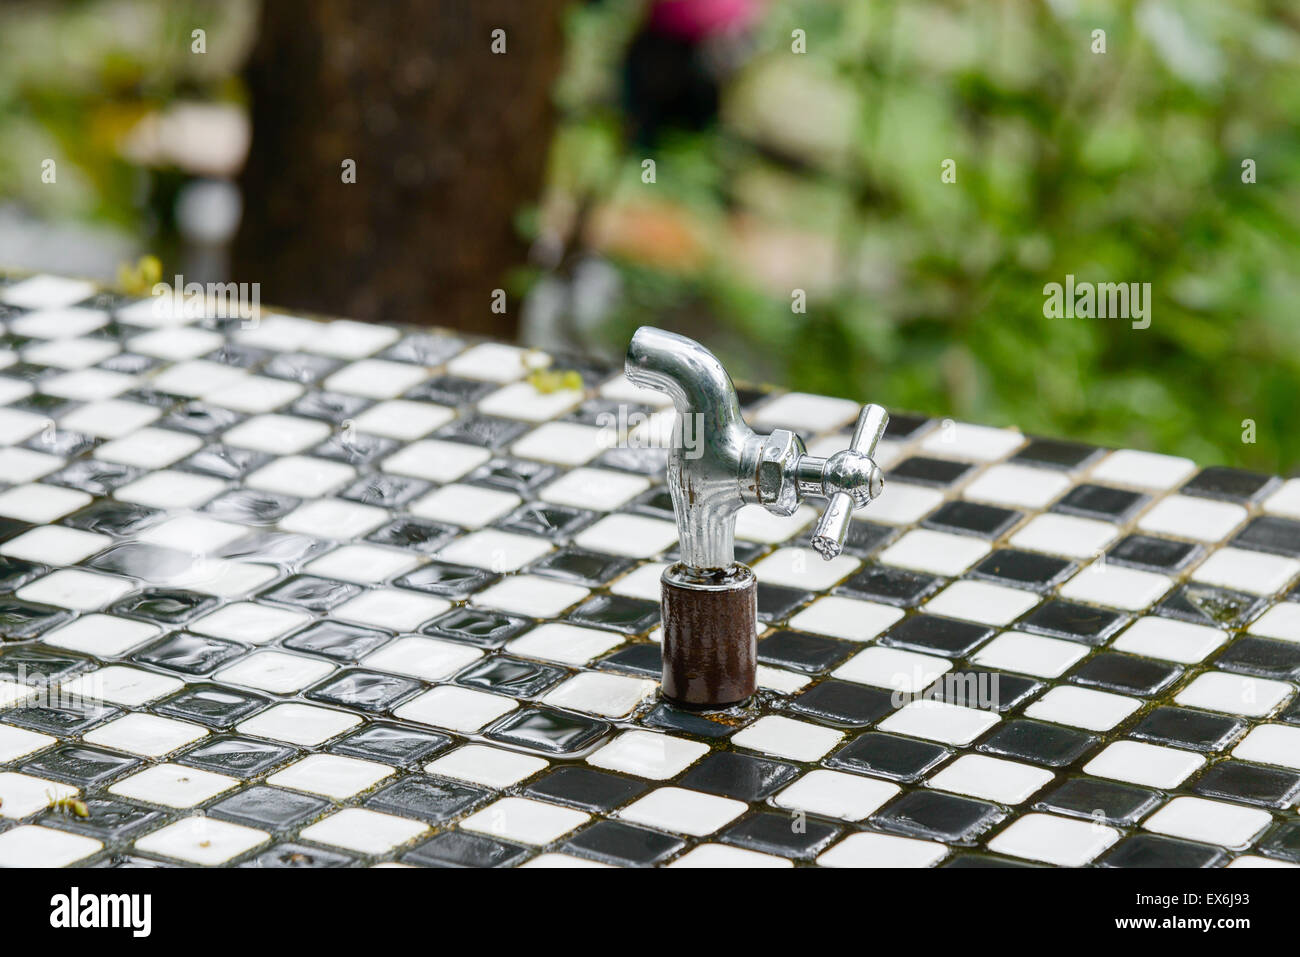 wet faucet on a drinking fountain in a outdoor in rainy day. Stock Photo